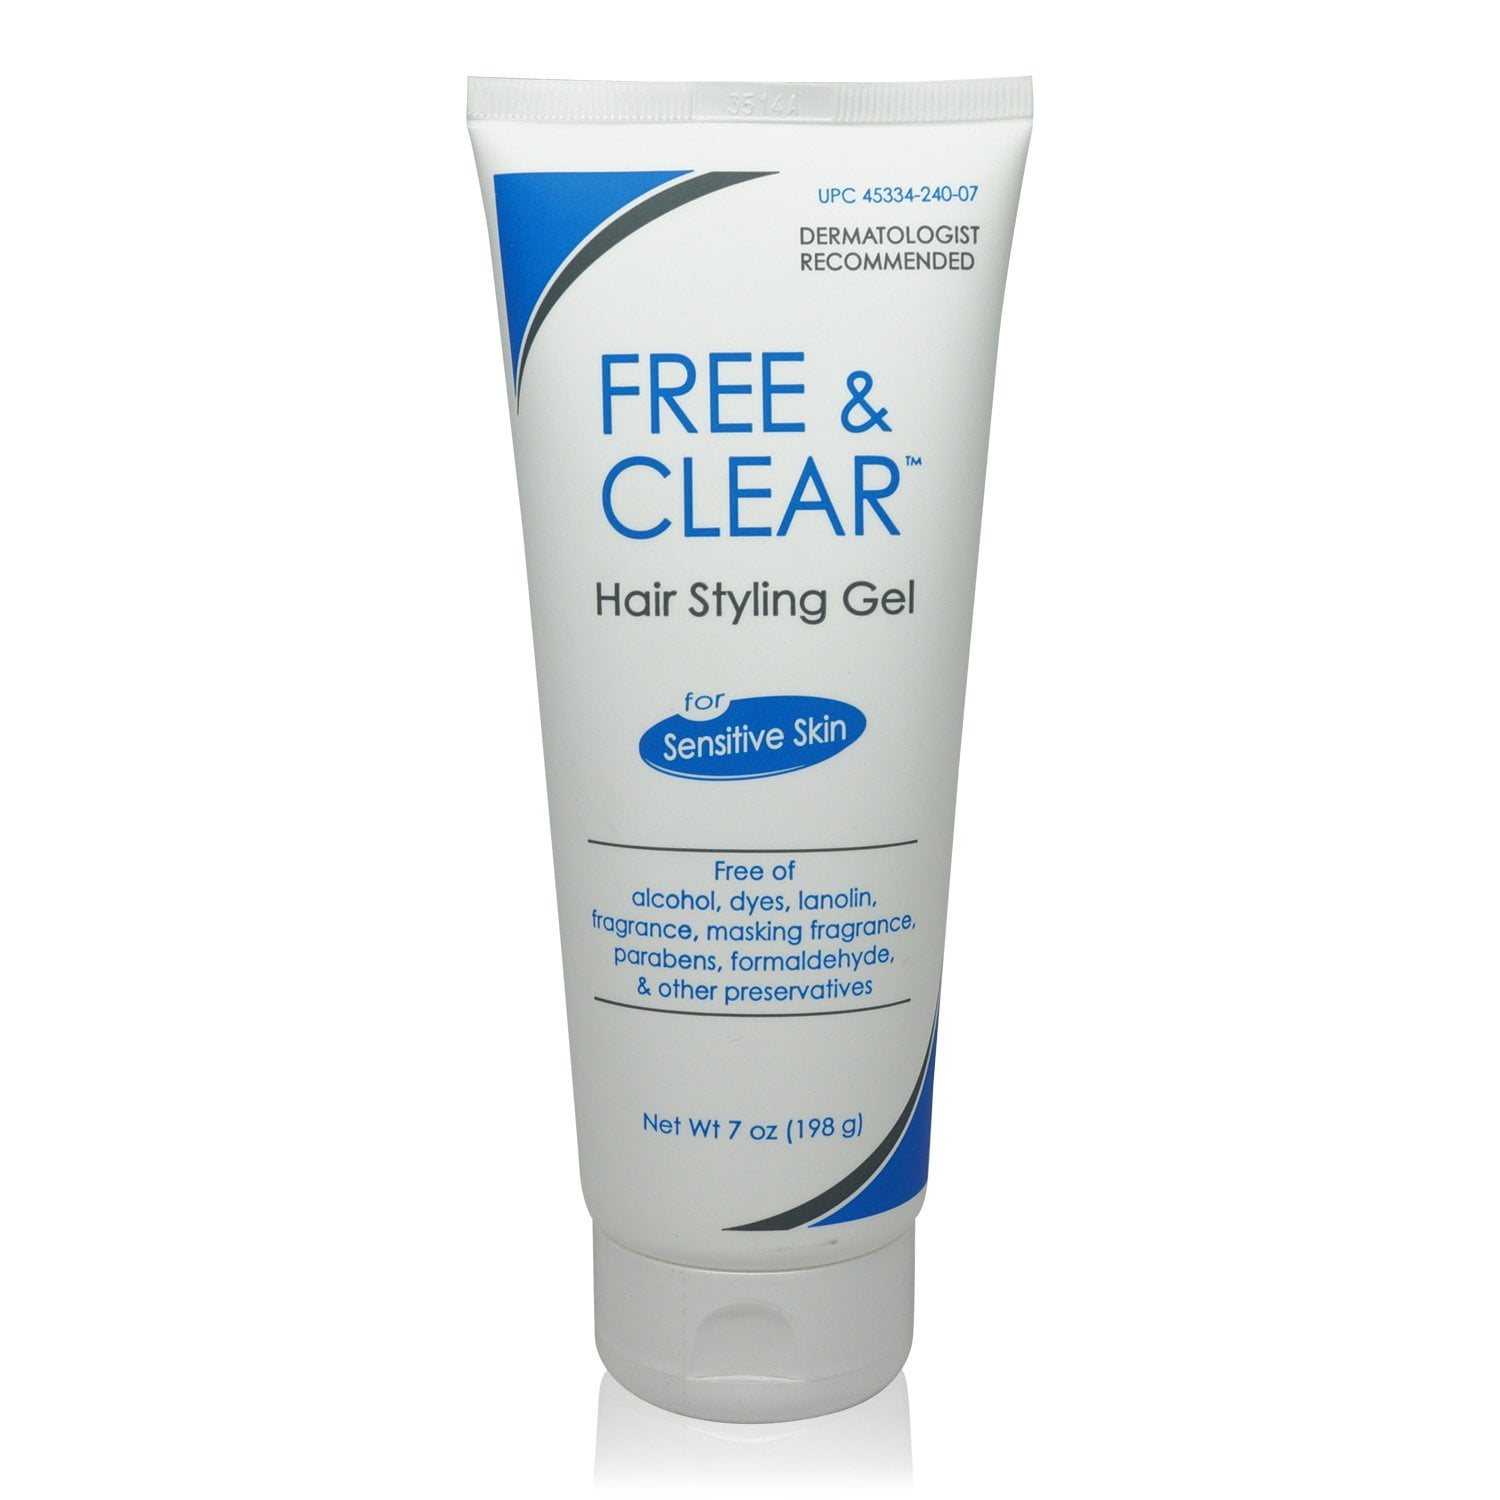 Free & Clear Hair Styling Gel for sensitive skin - fragrance free - 7 ounce  